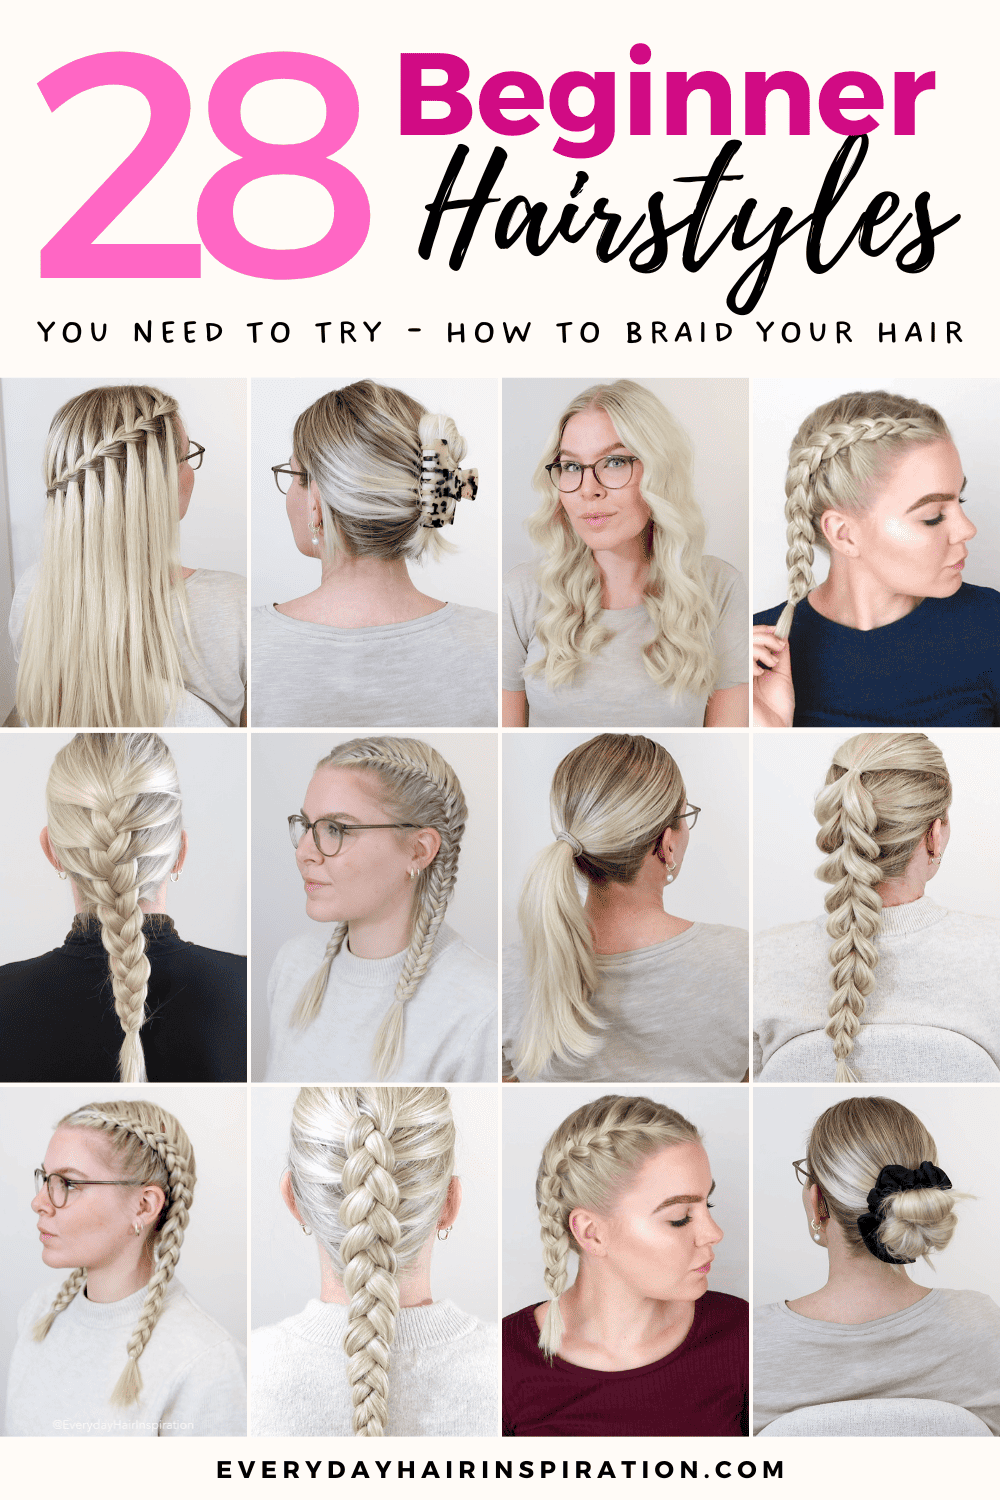 41 DIY Cool Easy Hairstyles That Real People Can Do at Home - DIY Projects  for Teens